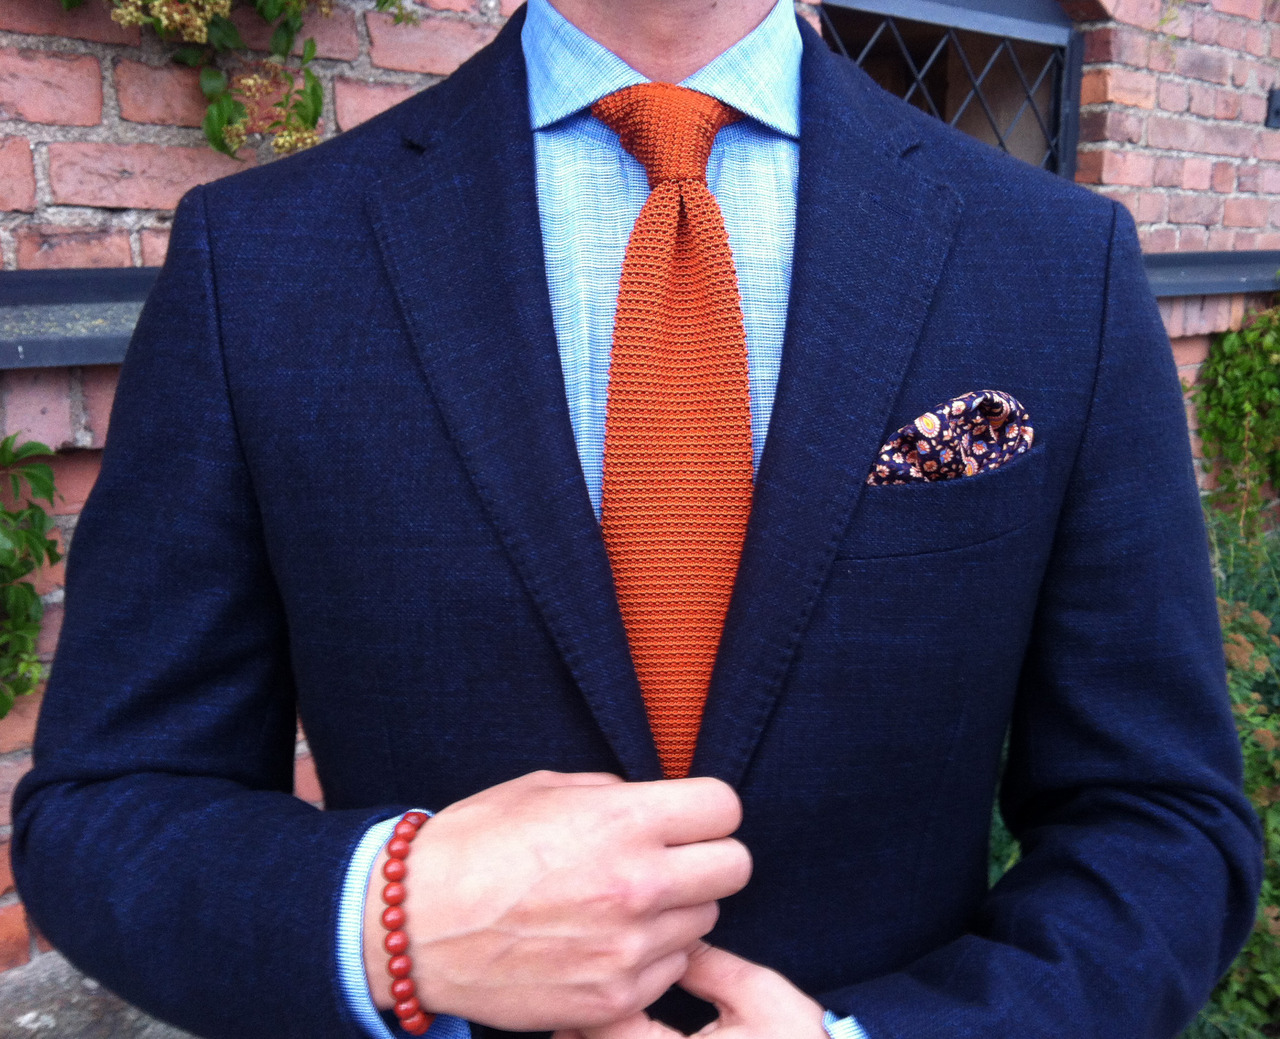 The Modern Man Blog: Mastering the Art: Tie and Blazer Combinations